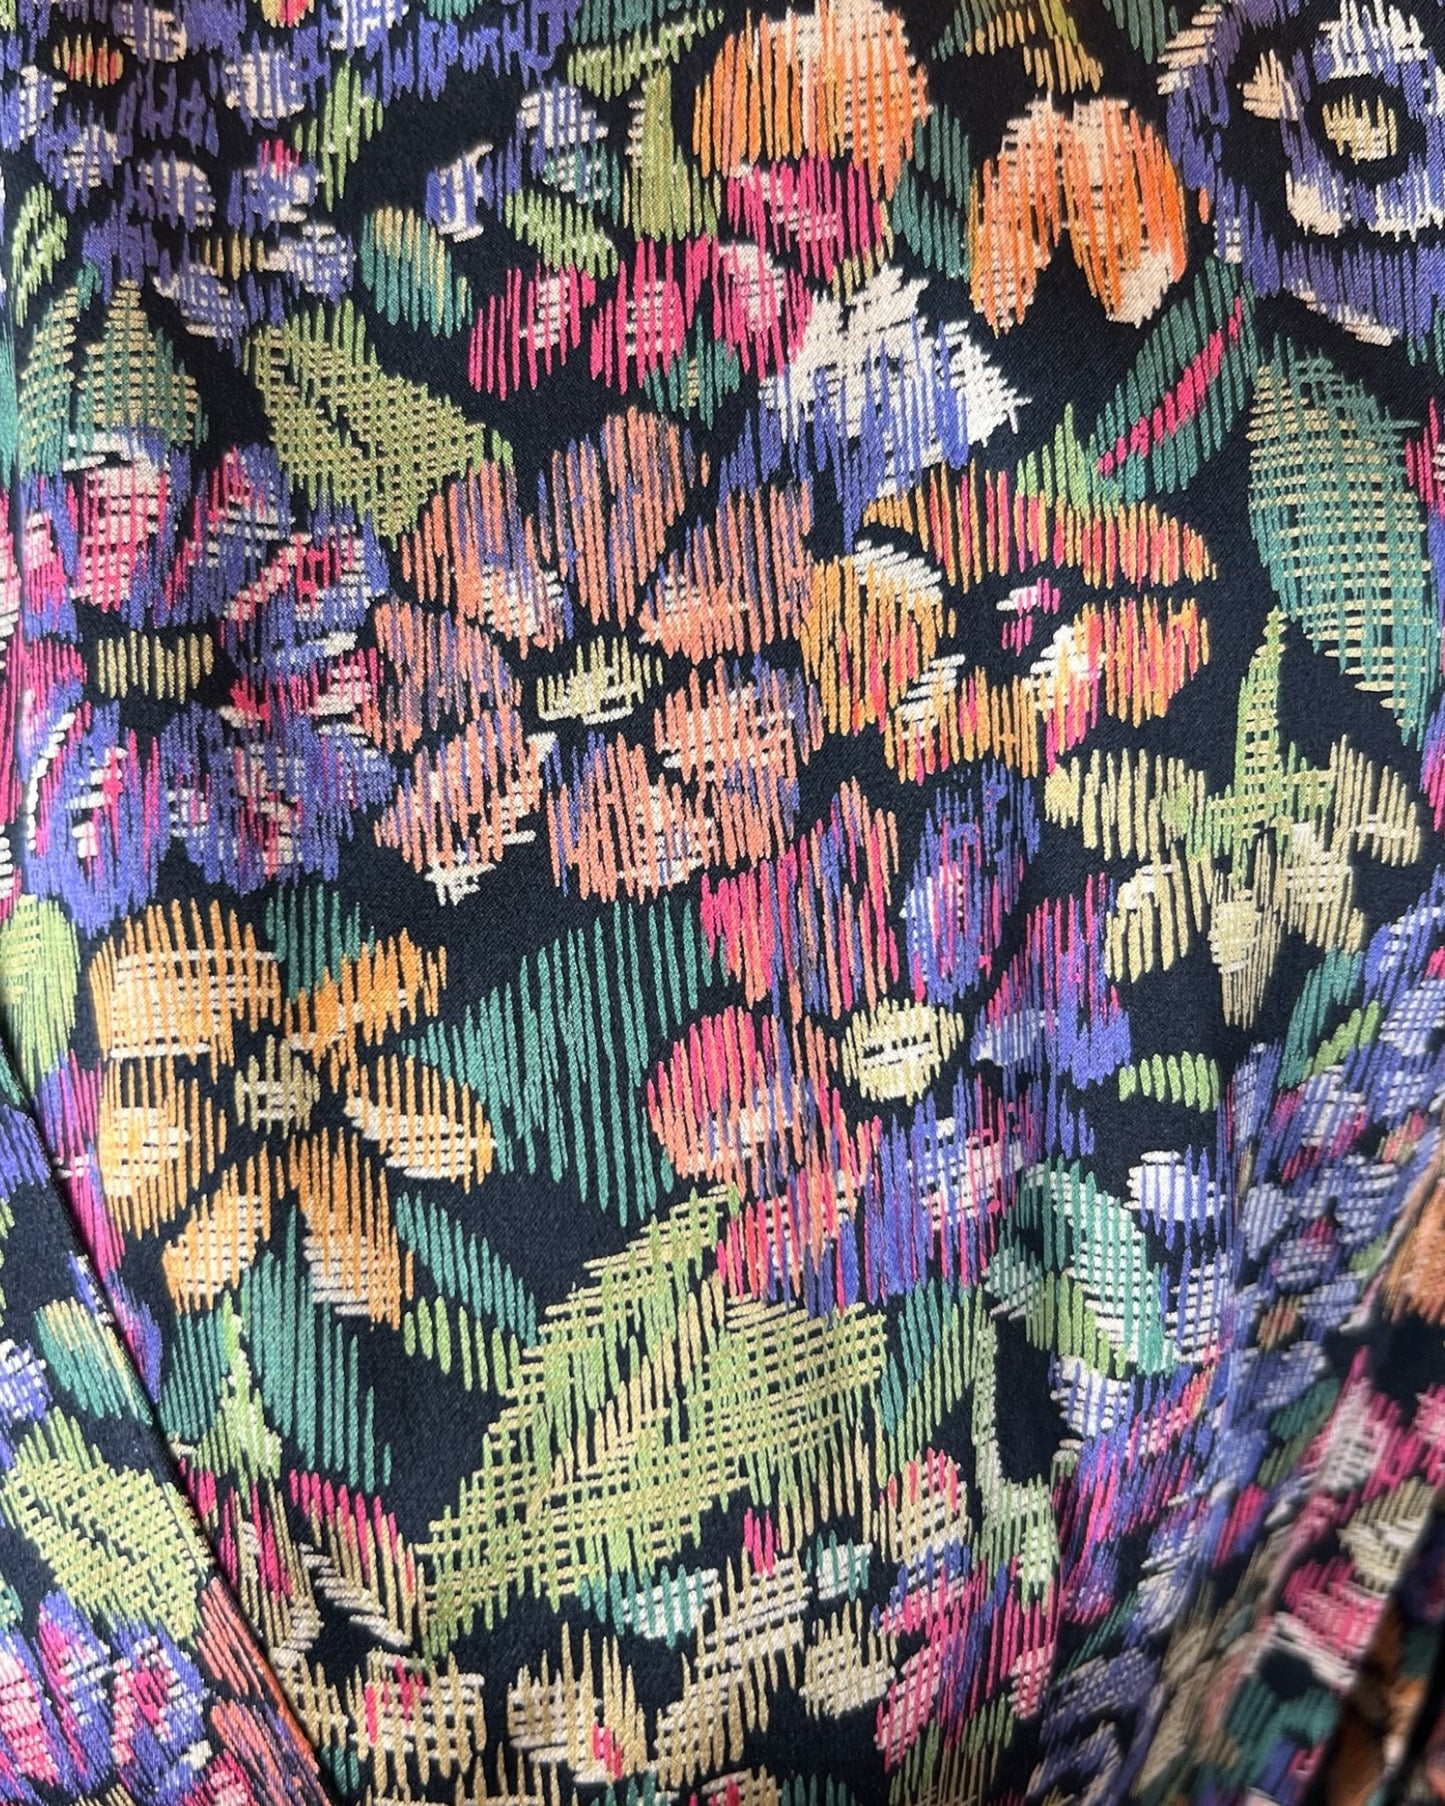 1970s Enchanted Forest Floral Dress